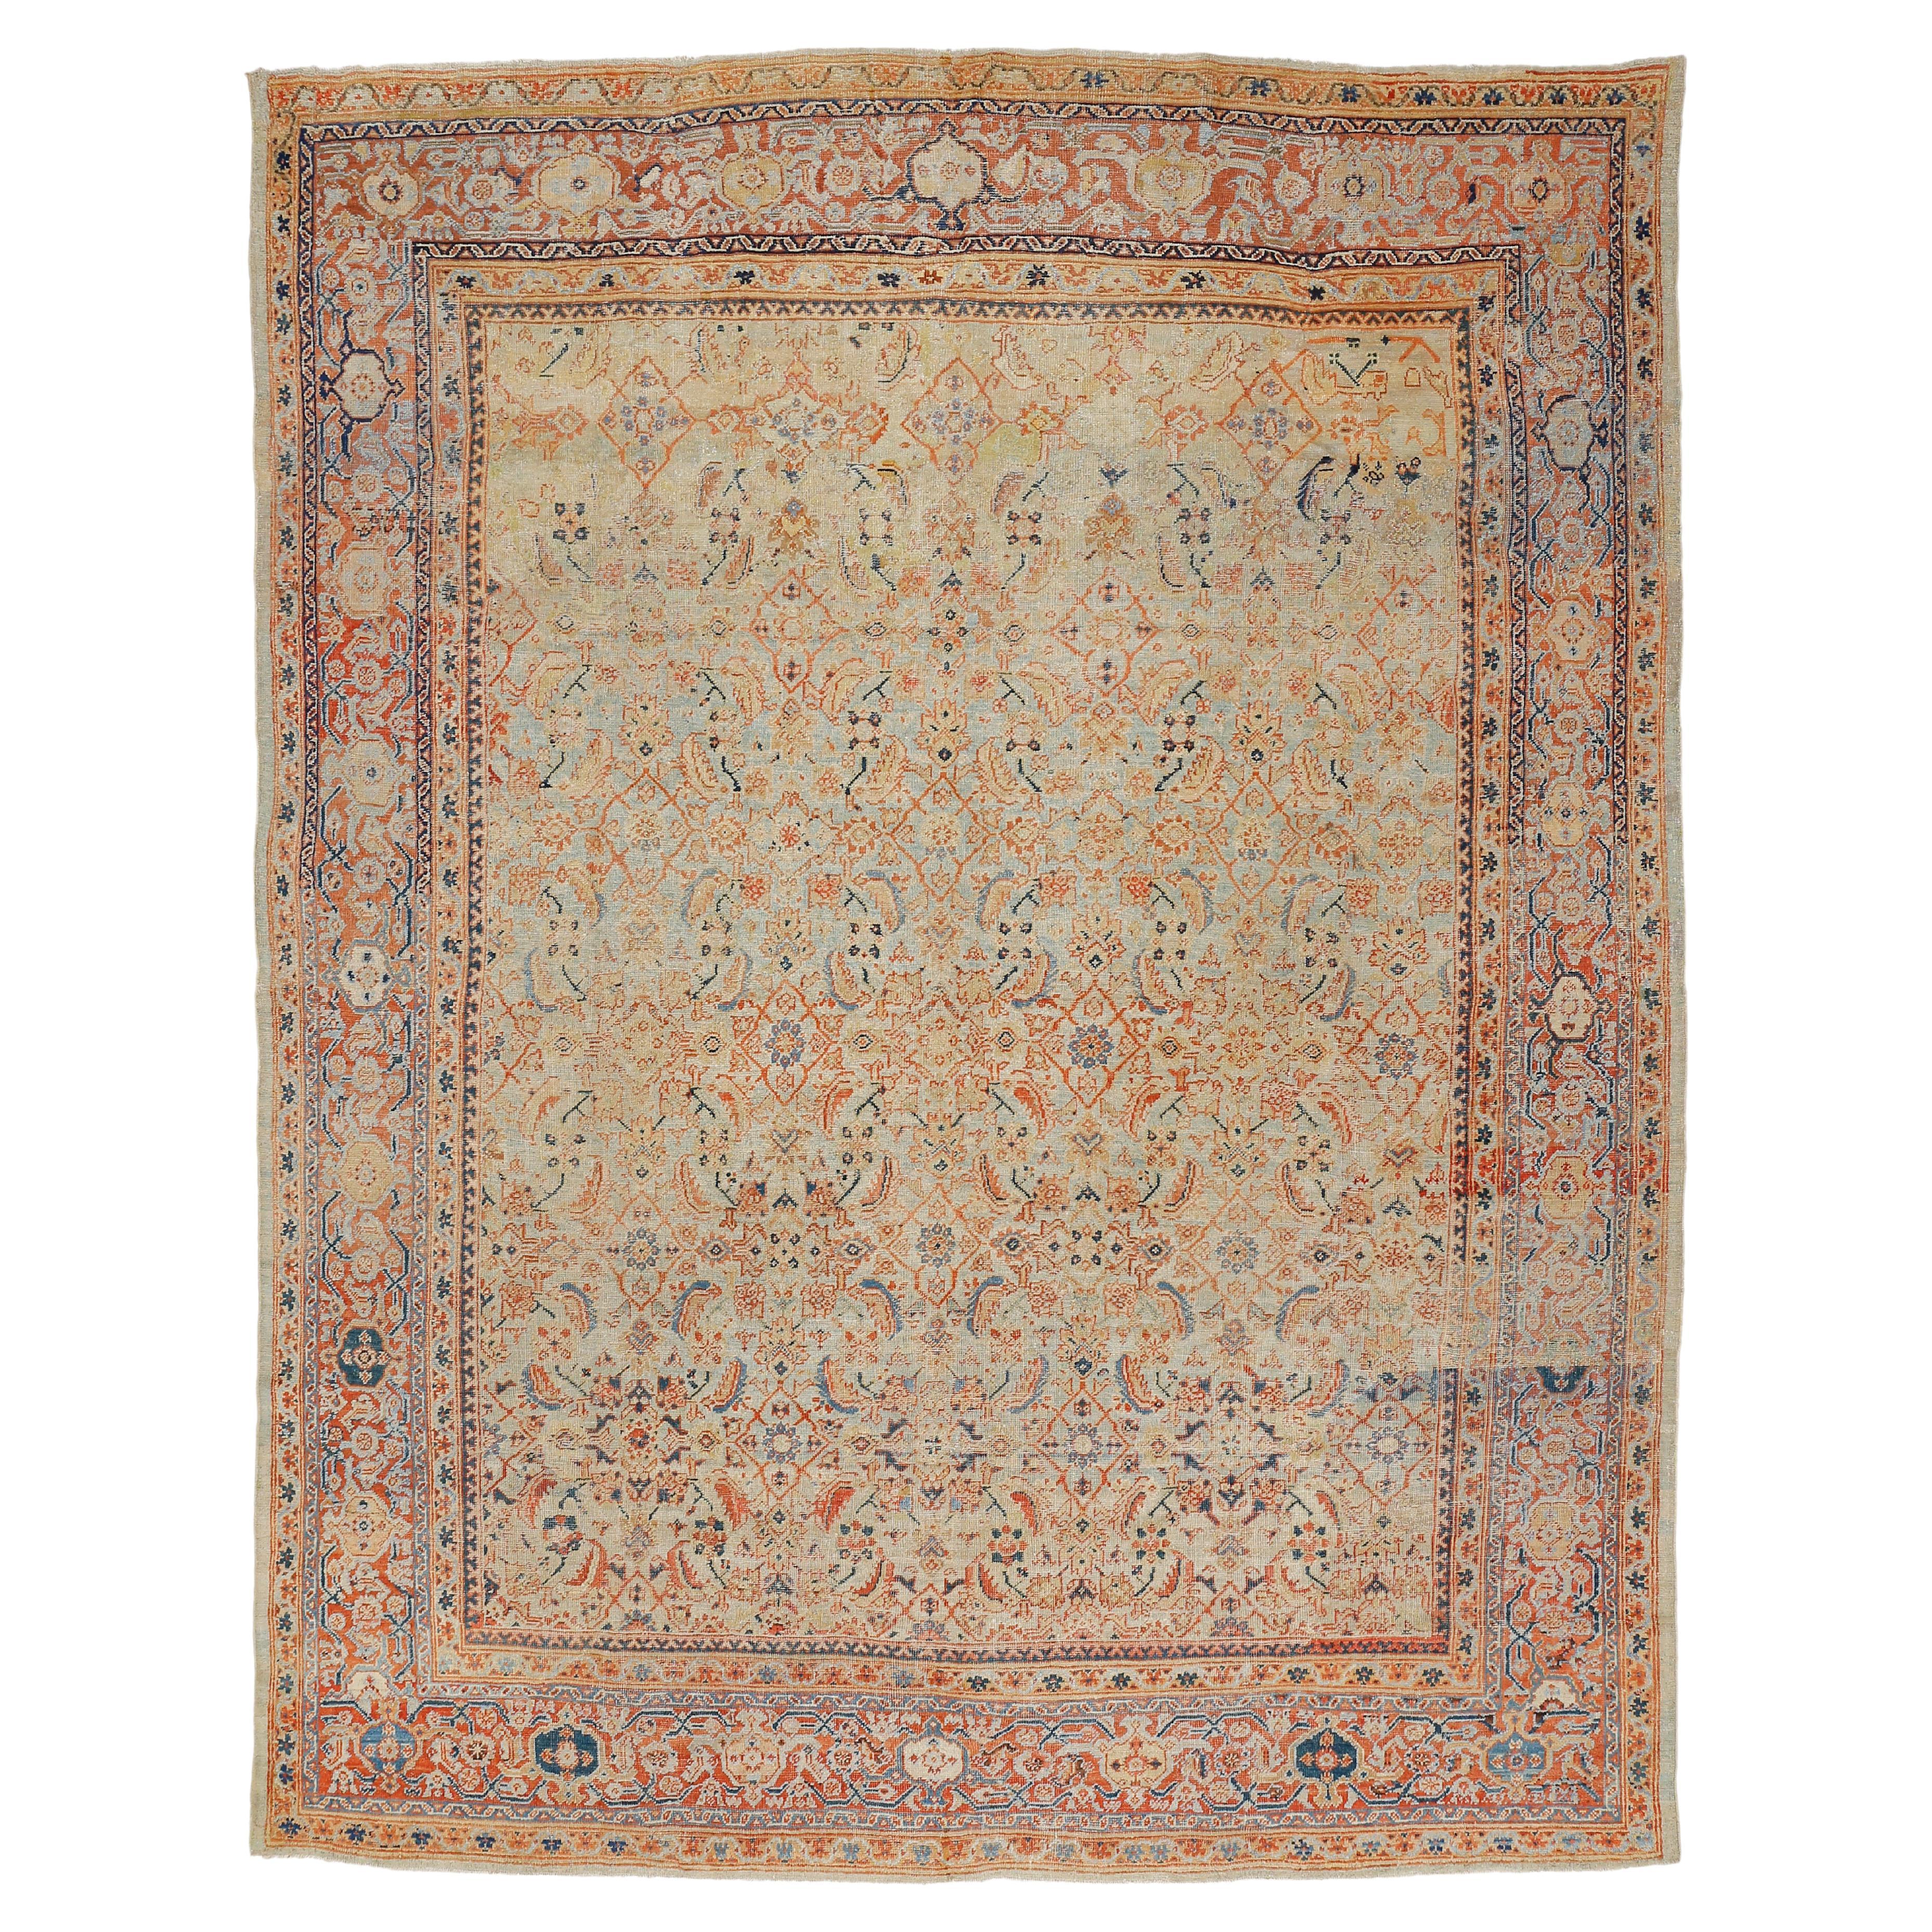 Antique Soft Teal Ziegler Sultanabad Rug with All-Over Pattern